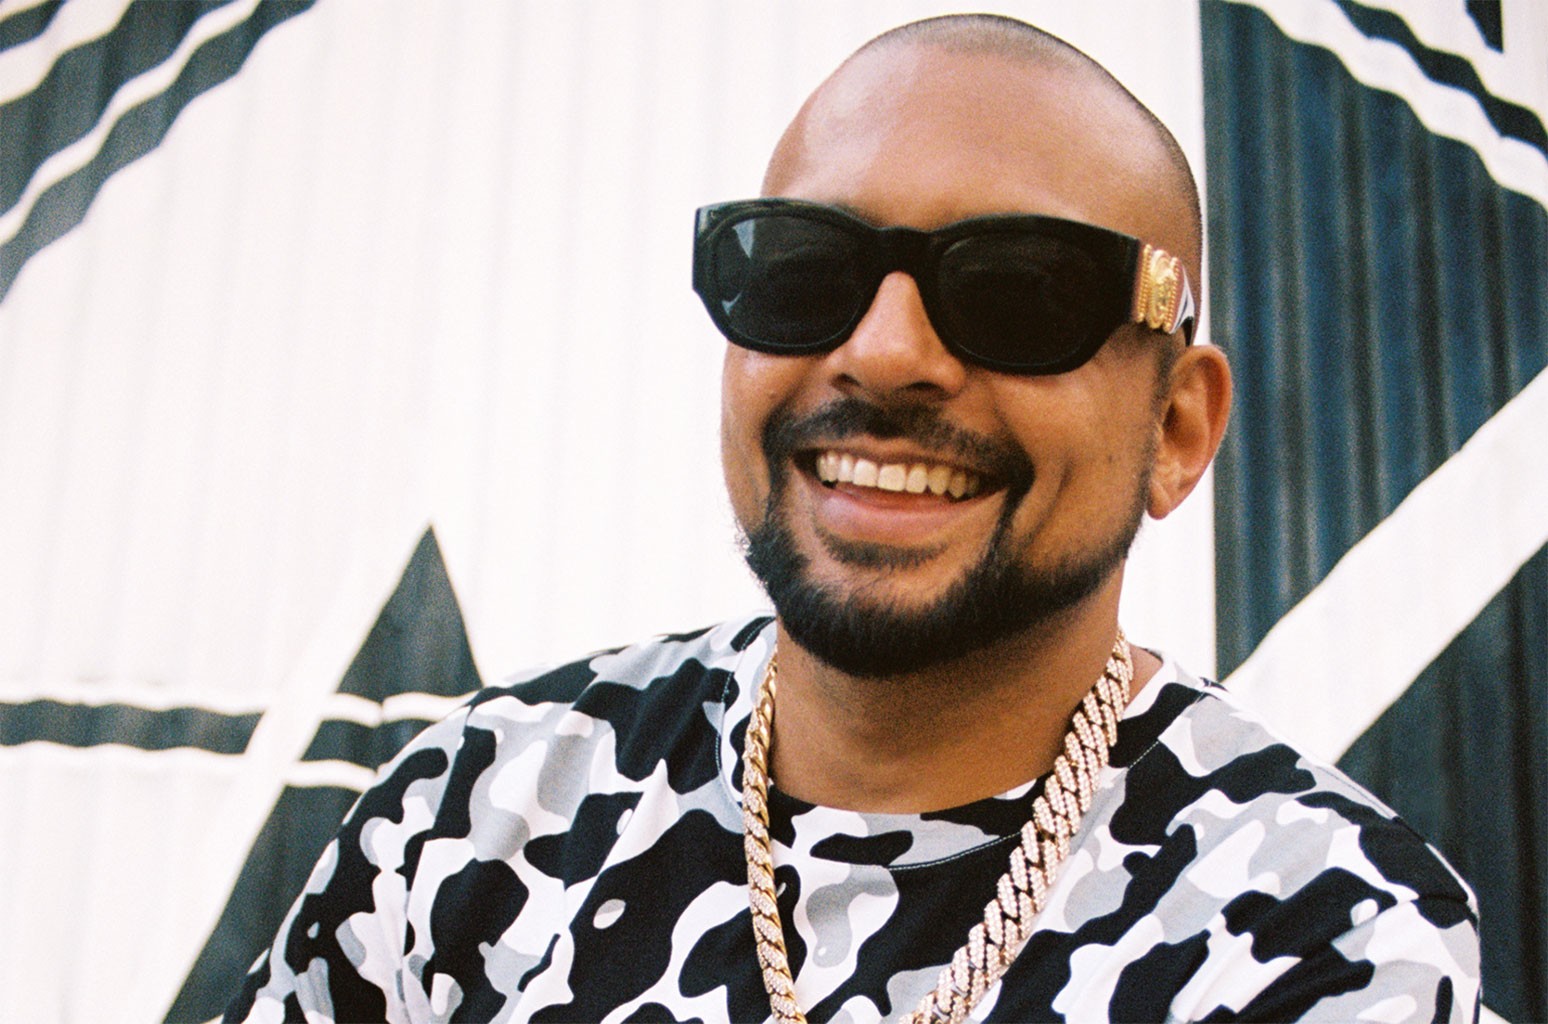 Sean Paul teases collab with Gwen Stefani and Shenseea “Light My Fire”